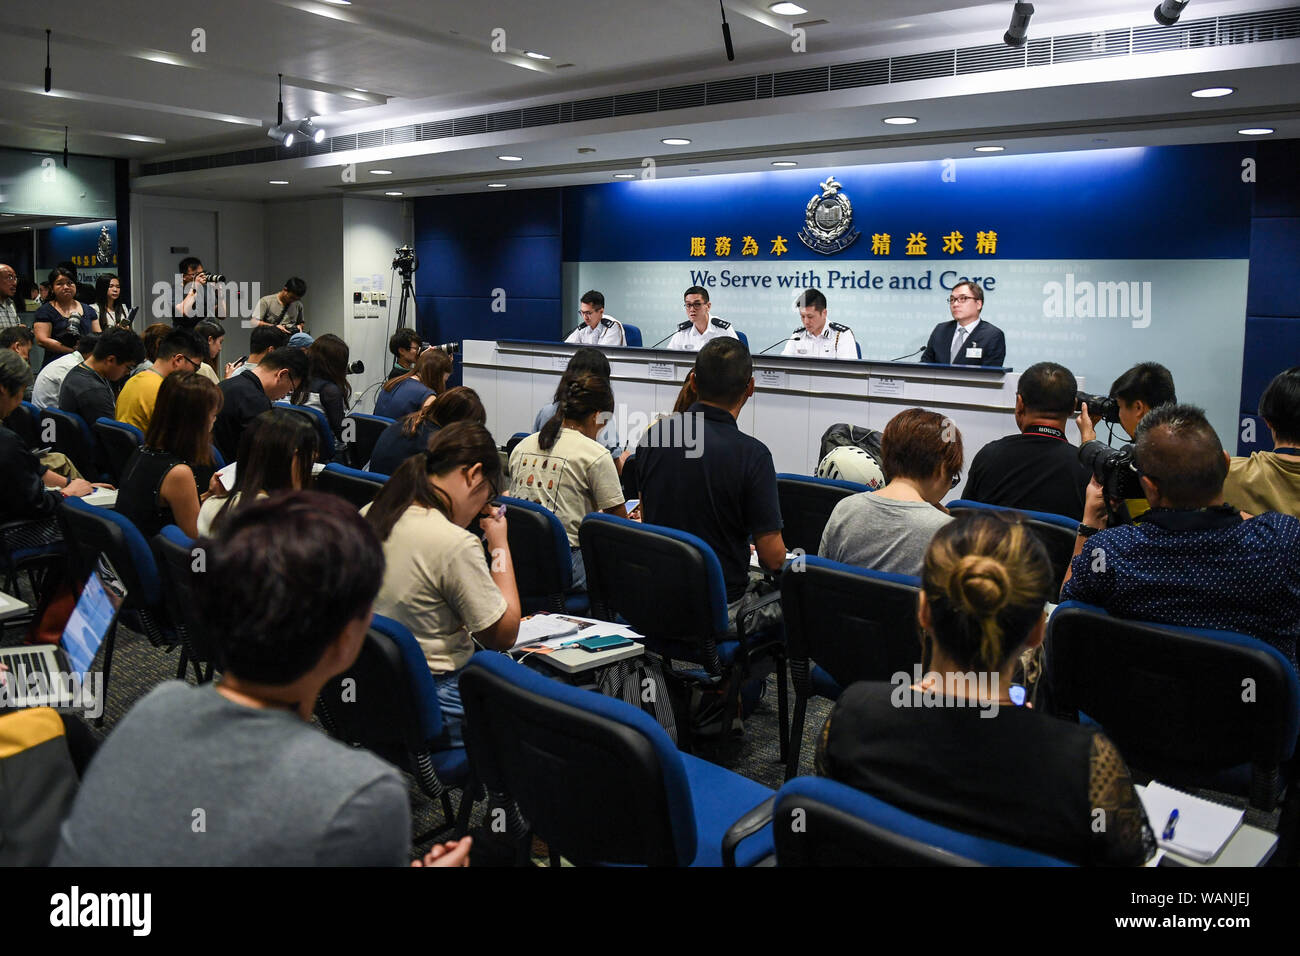 (190821) -- HONG KONG, Aug. 21, 2019 (Xinhua) -- Photo taken on Aug. 21, 2019 shows the scene of a press conference held by Hong Kong police in south China's Hong Kong. Hong Kong police on Wednesday called on all journalists to respect each other's freedom of news coverage after a female reporter from the mainland was surrounded by her Hong Kong peers questioning her identity after a press conference on Tuesday. The police have existing measures to effectively verify reporters' identity, consistent with that of other press conferences of the Hong Kong Special Administrative Region (HKSAR) g Stock Photo